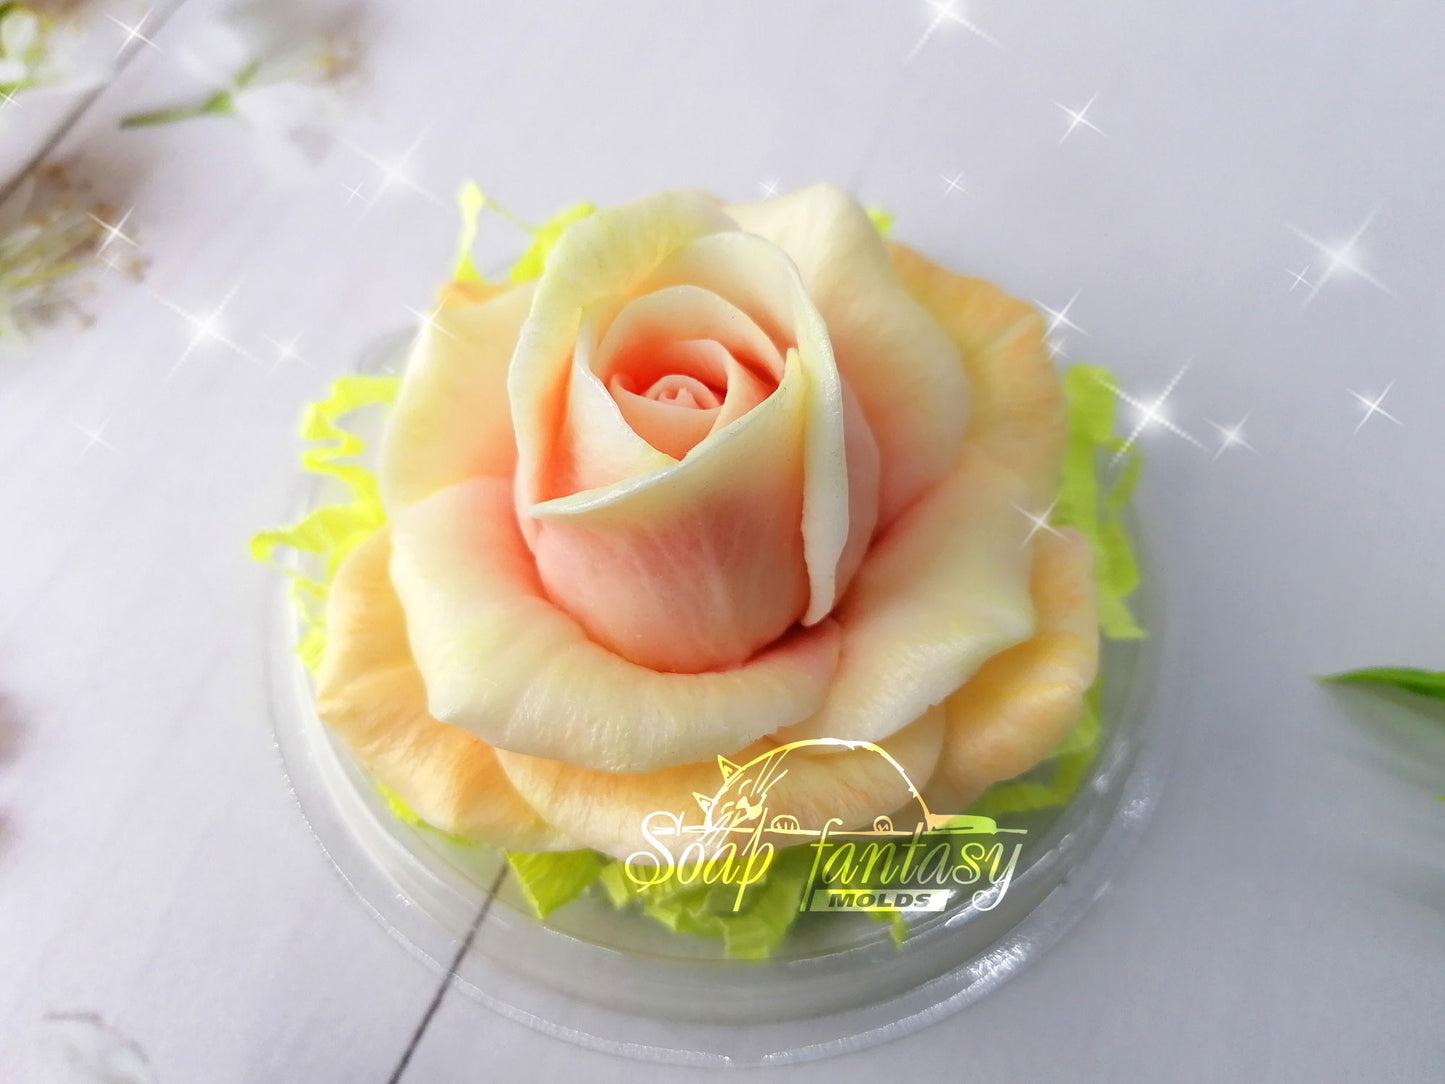 Big rose "Sun City" silicone mold for soap making